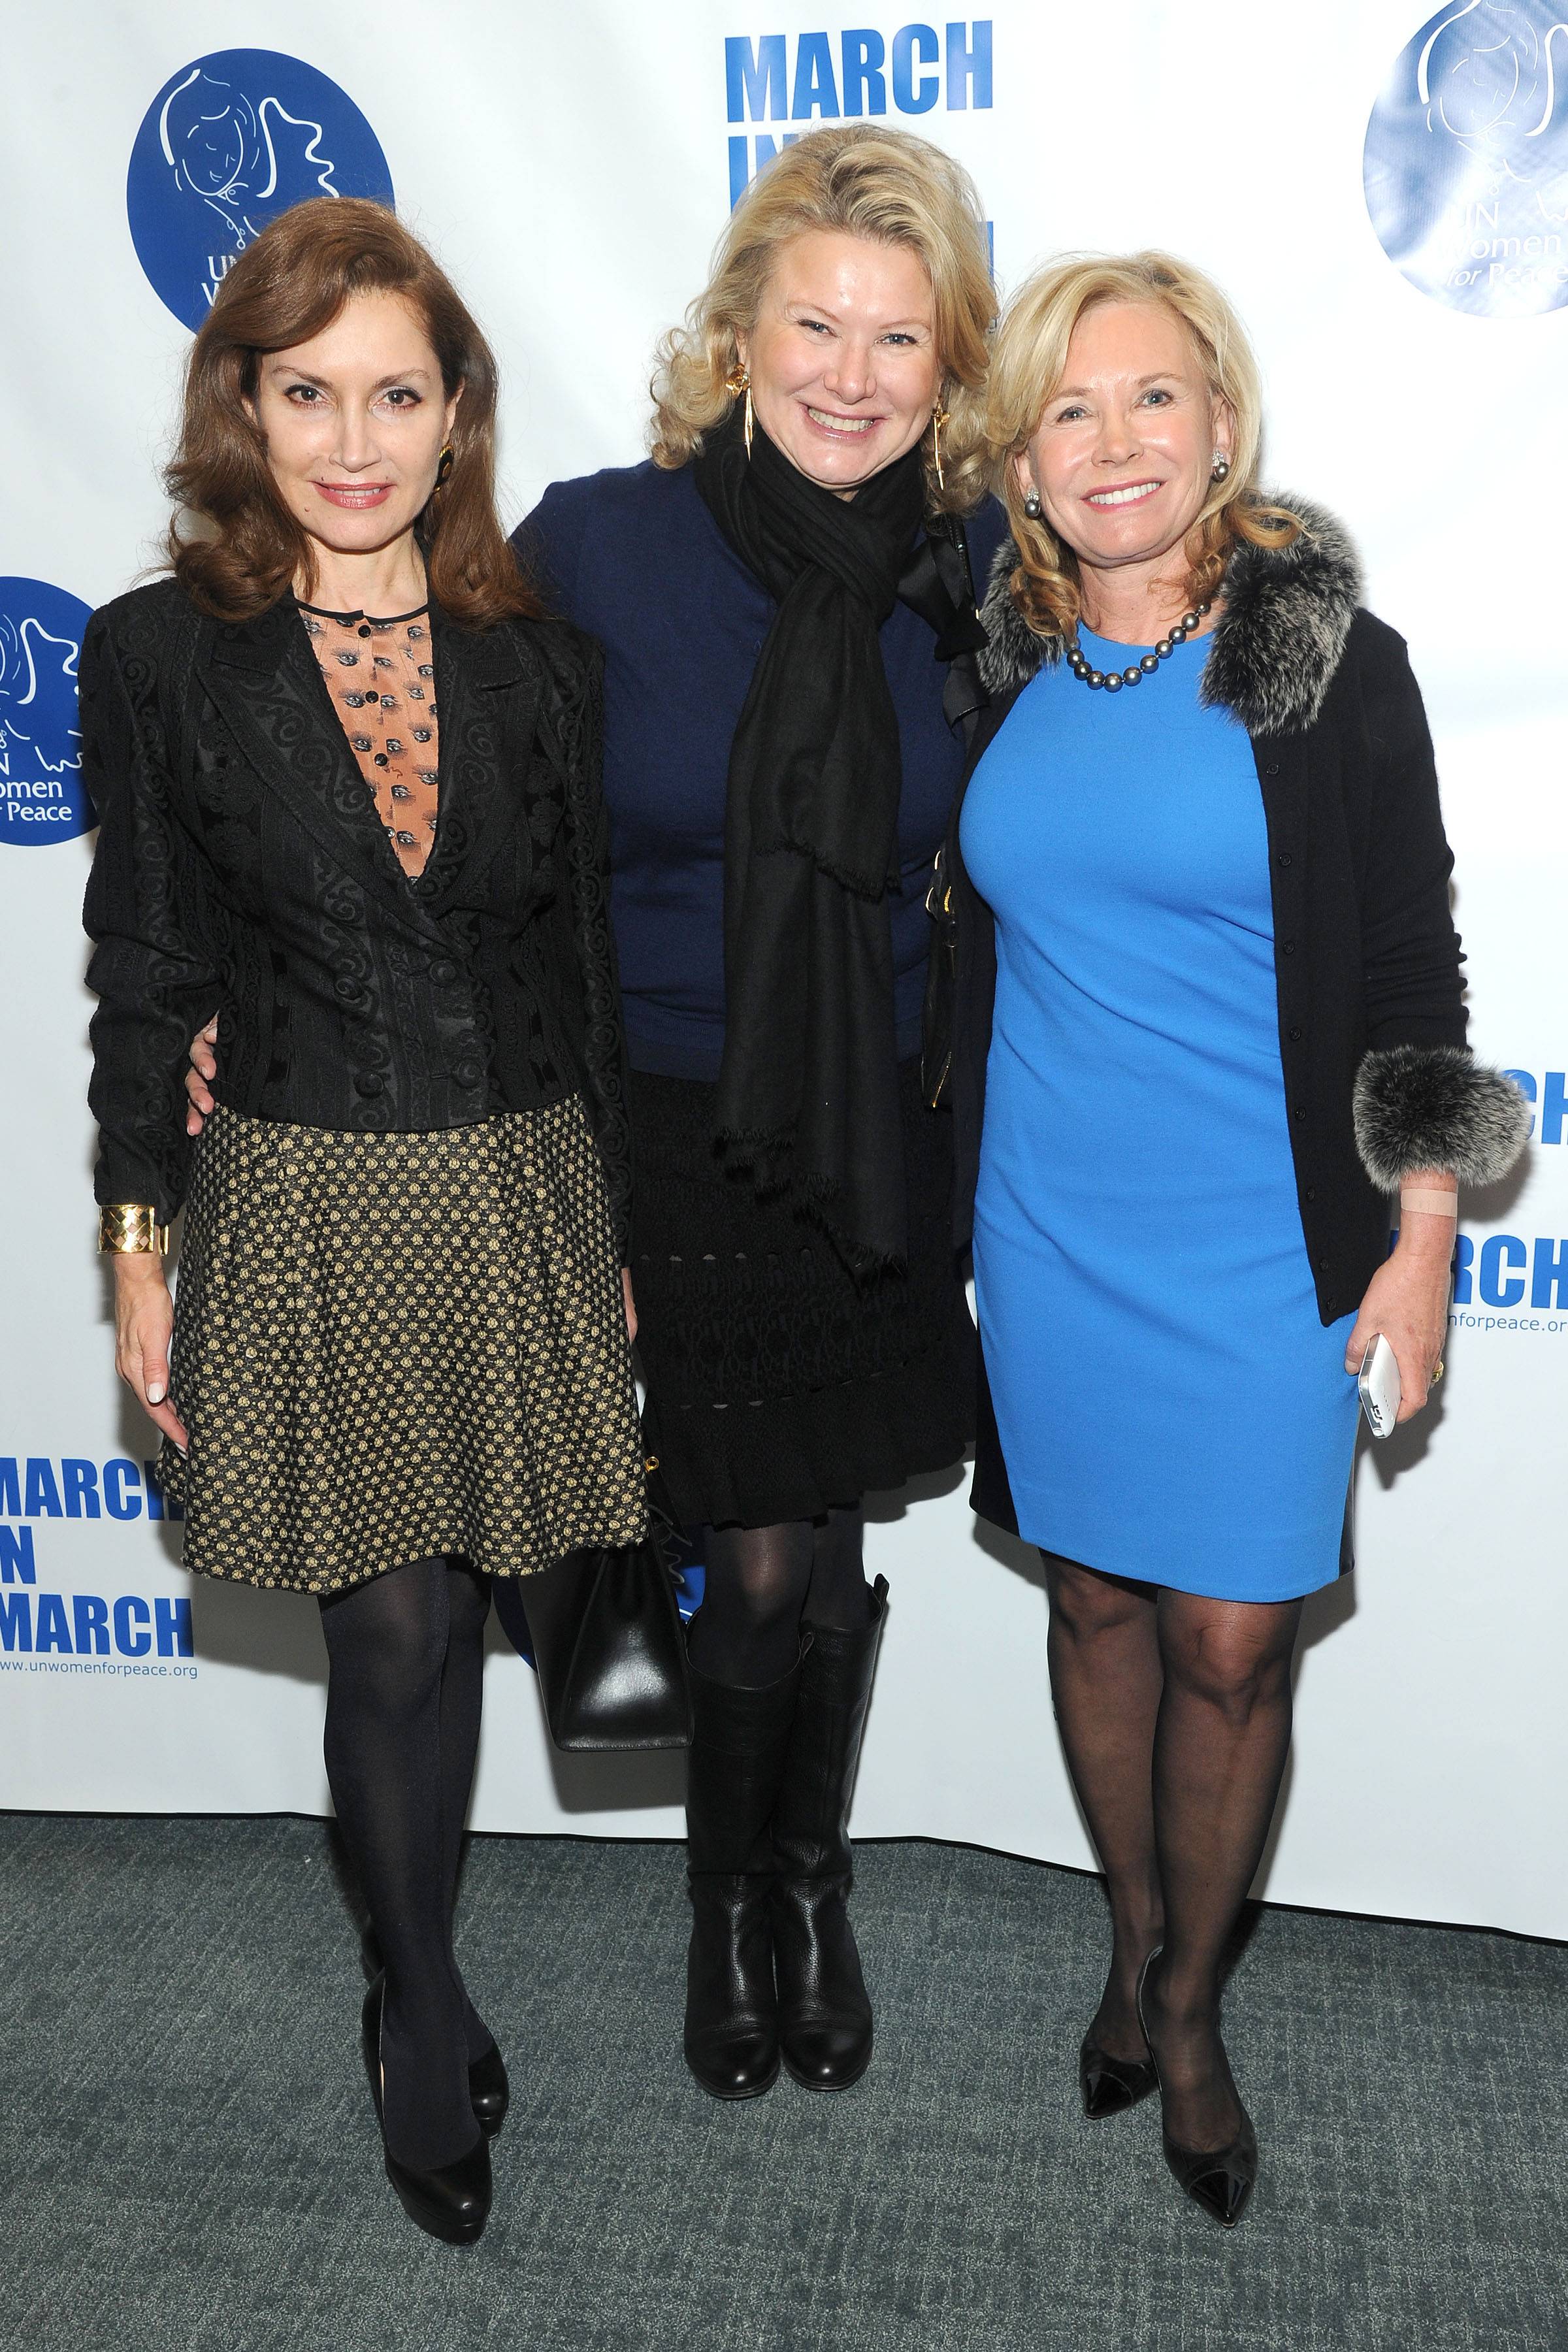 UN Women For Peace's Annual March in March 2014 Awards Luncheon